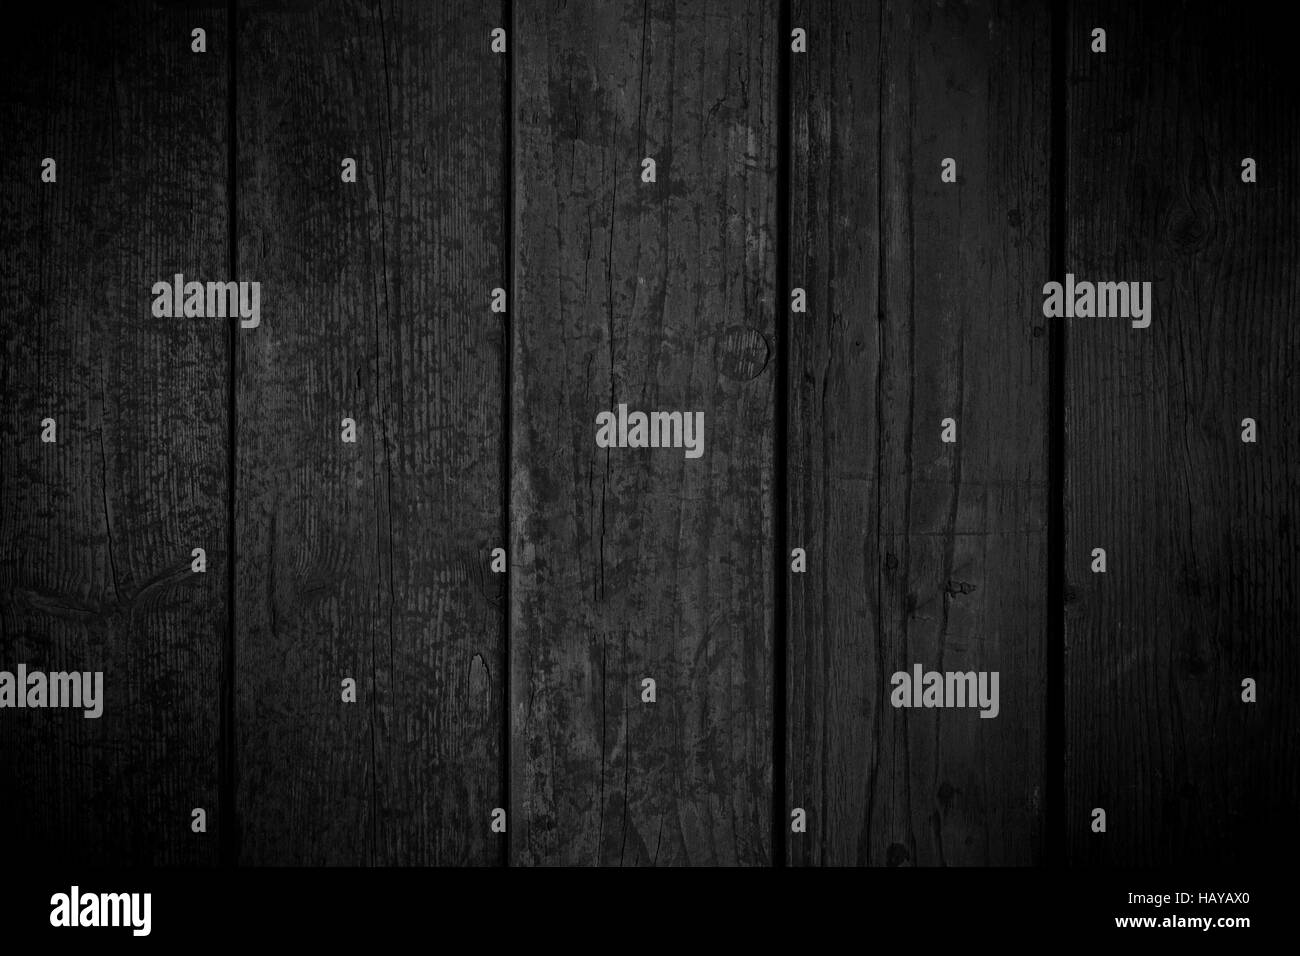 black wooden background or wood grain texture Stock Photo